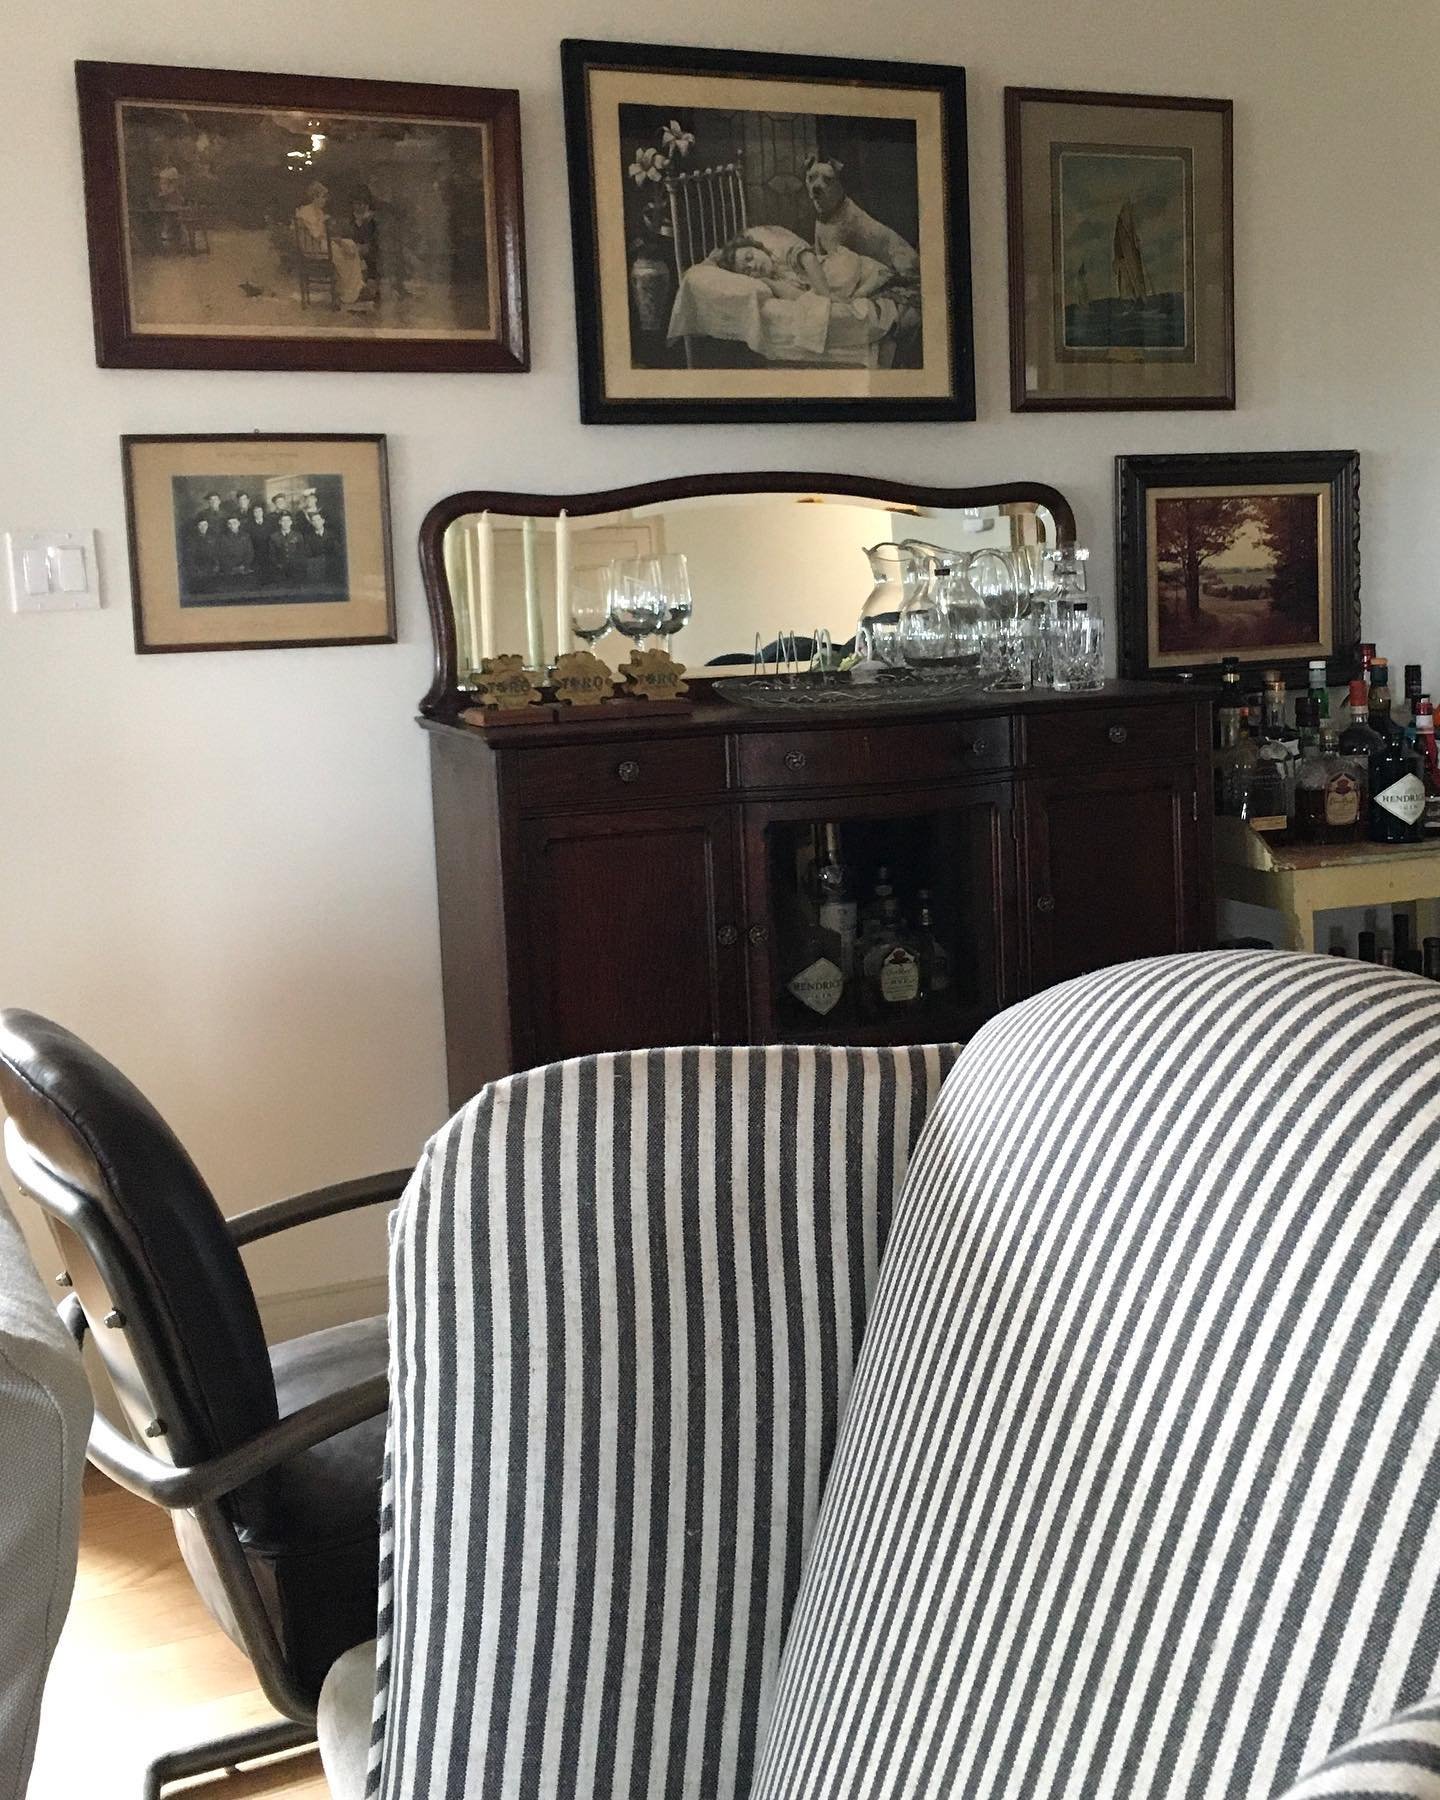 Loading in and unpacking&hellip; // We recovered an old wing chair in this crisp stripe 🤍🖤 and begun hanging a gallery wall of vintage framed pieces over the family&rsquo;s antique sideboard, which is awaiting the addition of a new marble top.  #CR